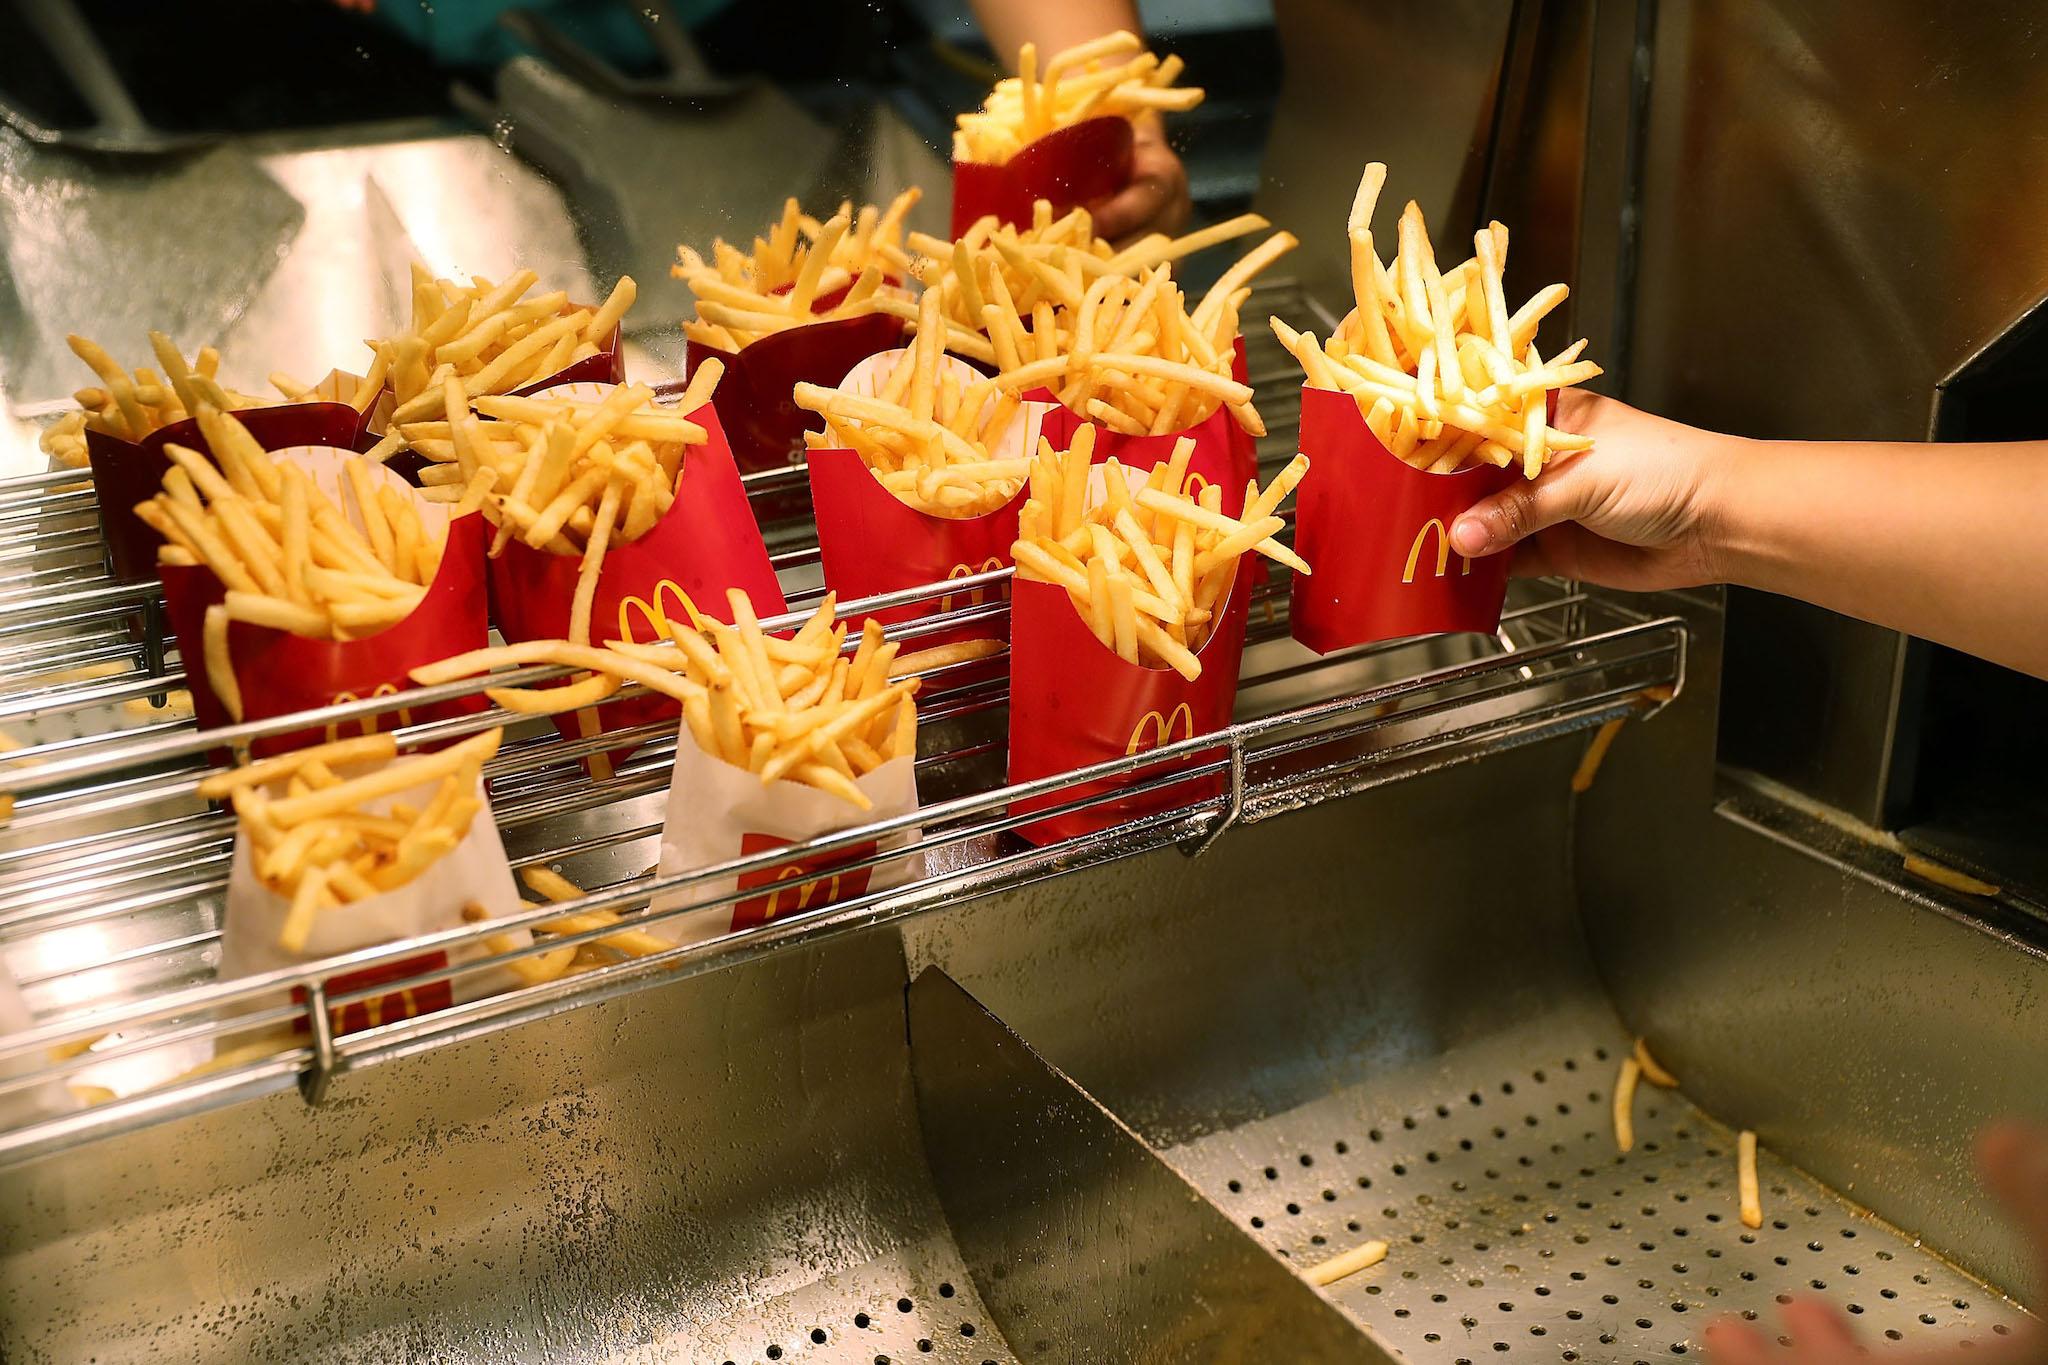 The company makes their French fries from whole potatoes which are peeled, cut and partially fried